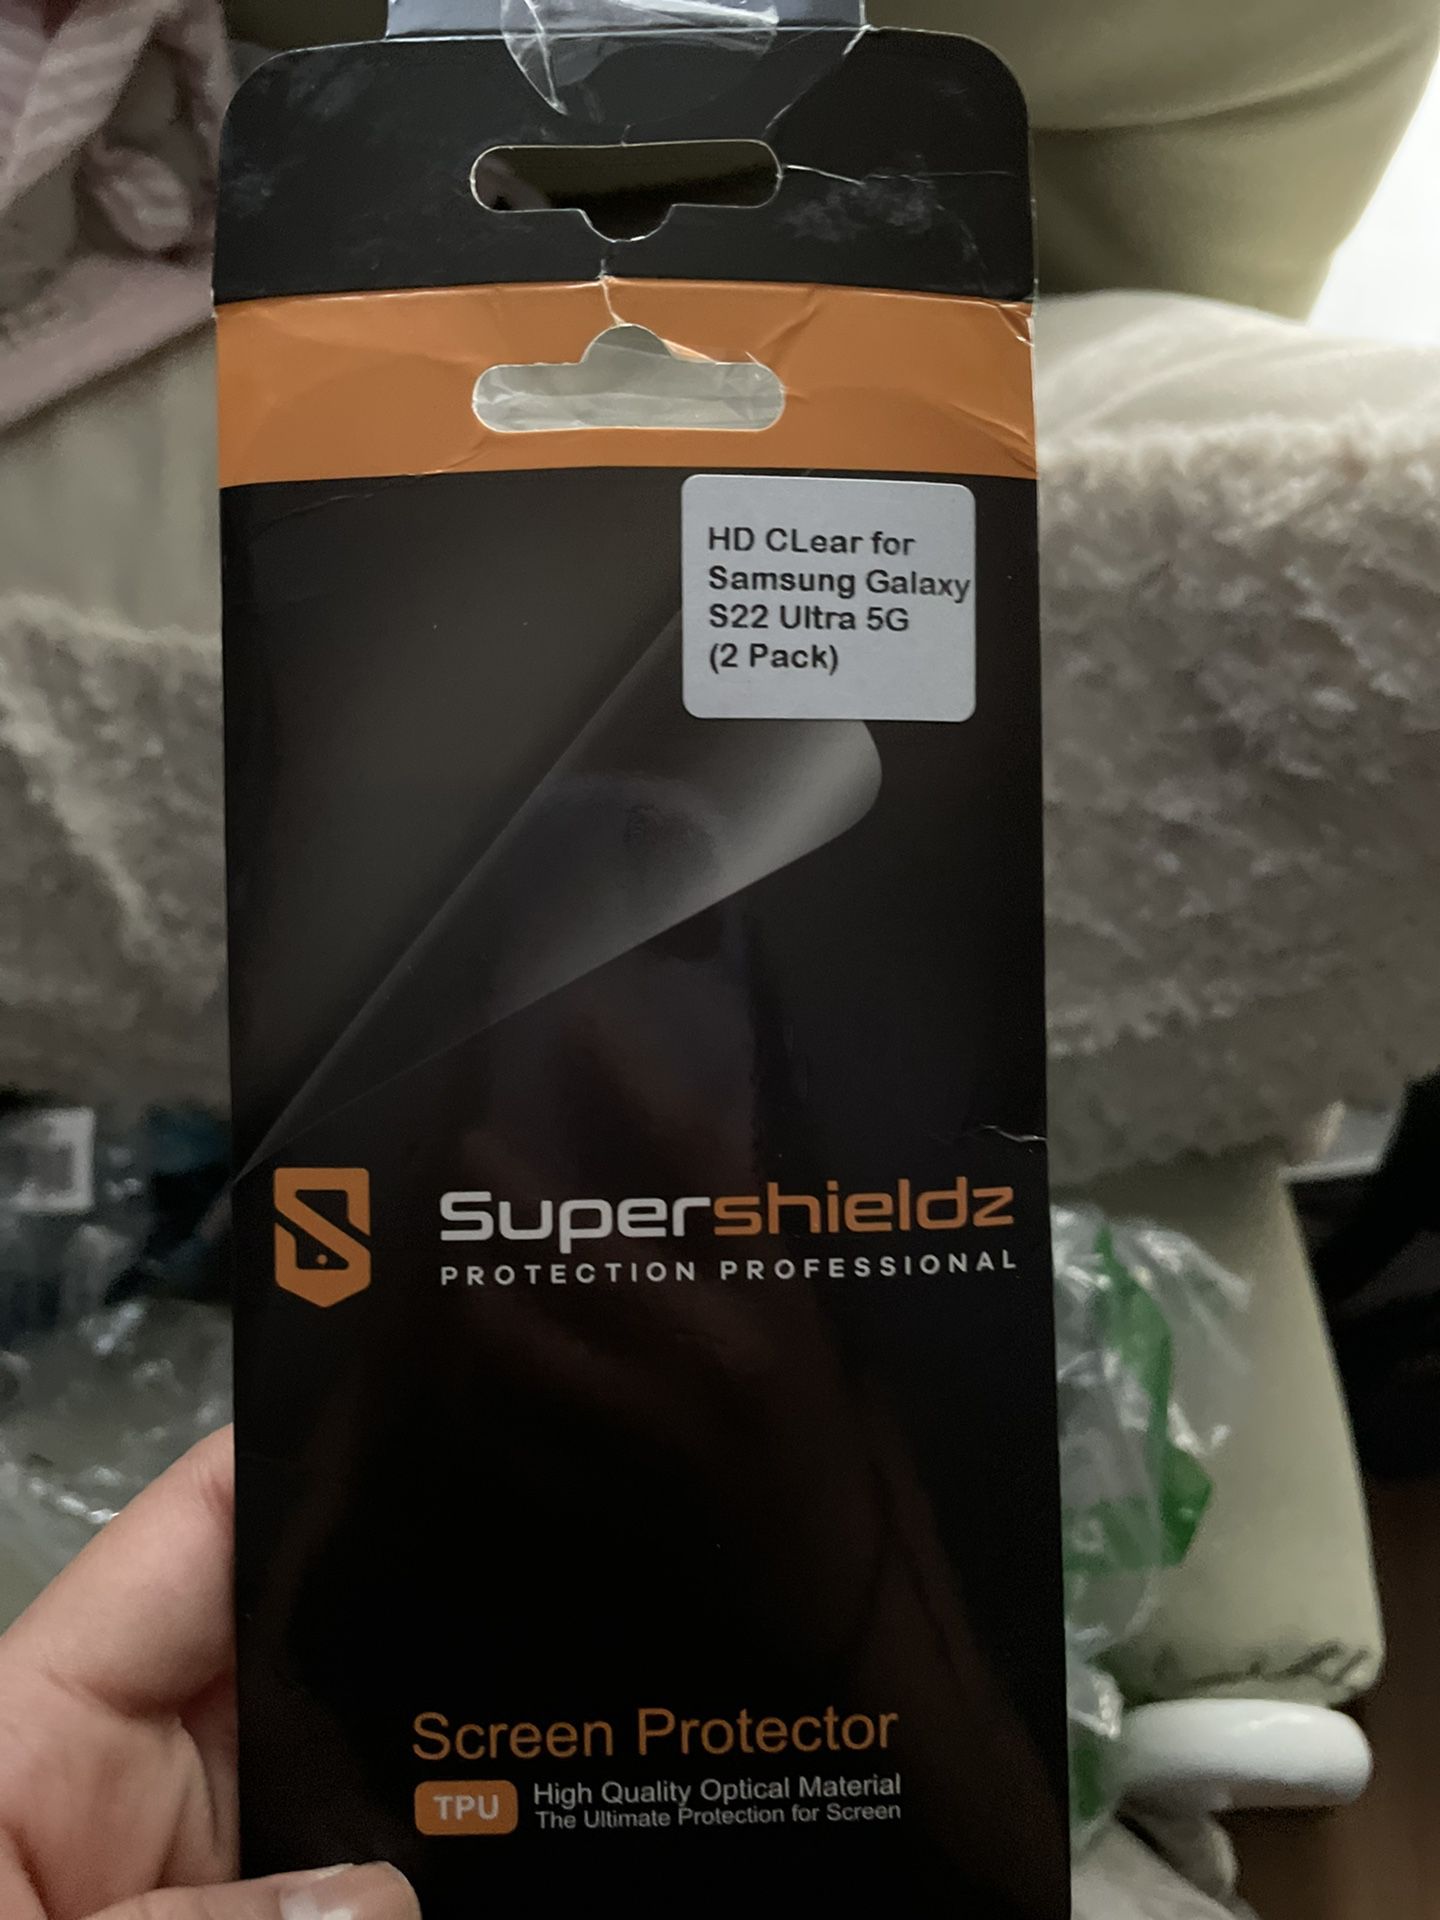 Super Shields Protection Professional 